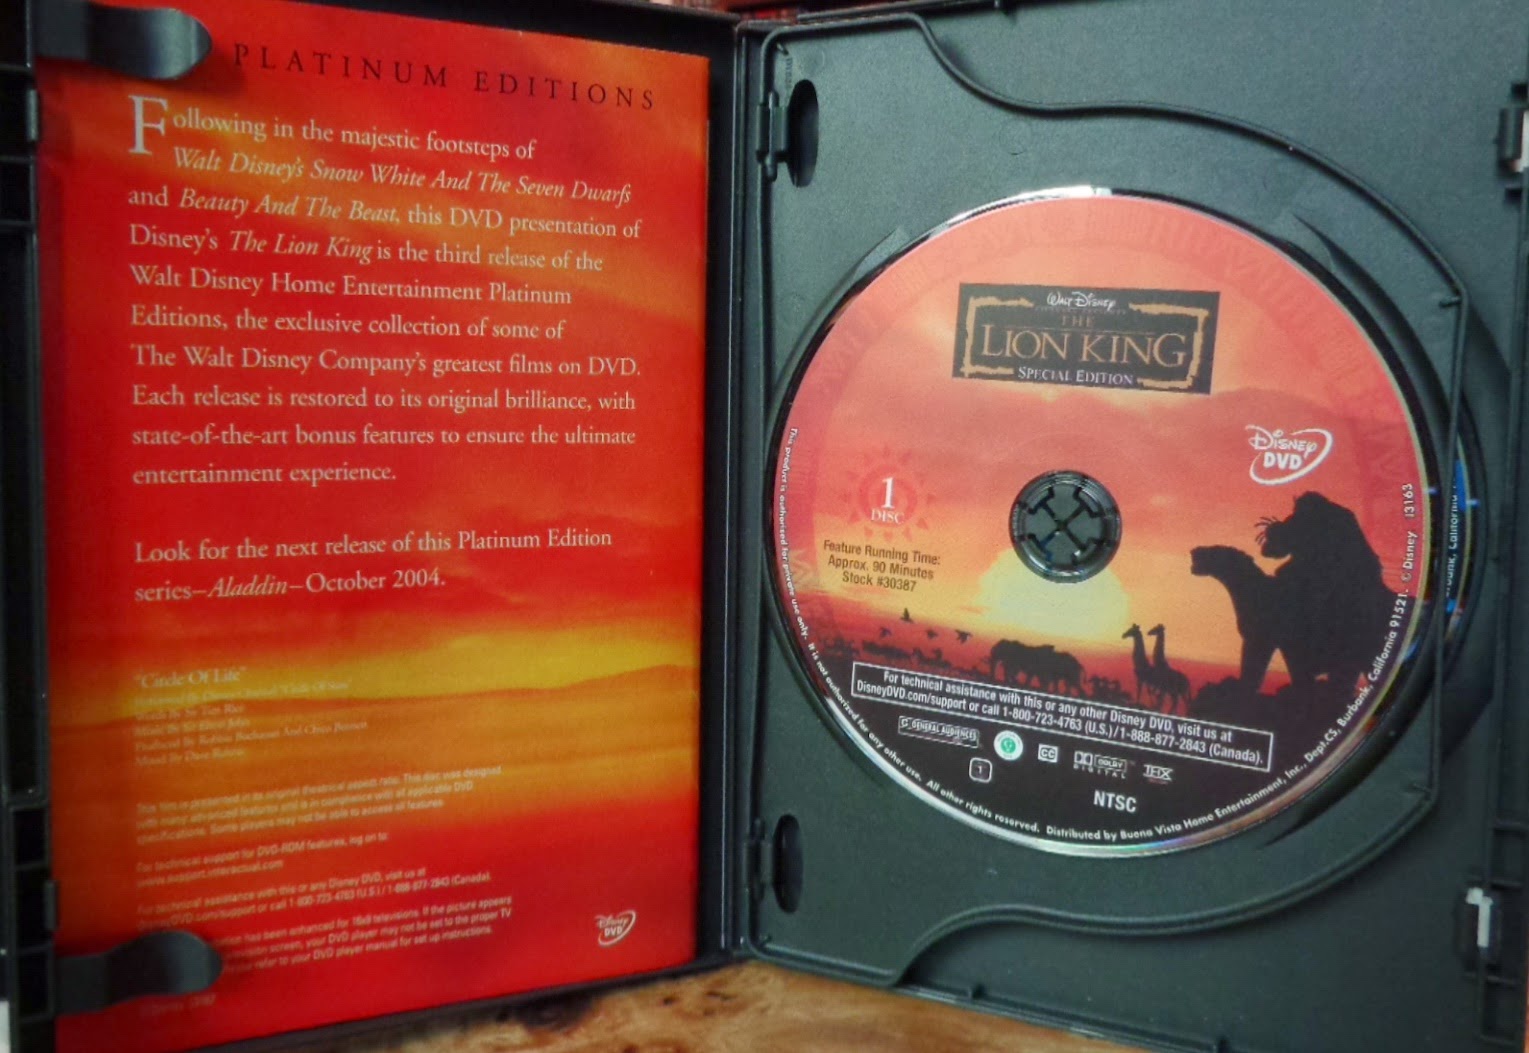 Movies on DVD and Blu-ray: The Lion King (1994)1529 x 1053